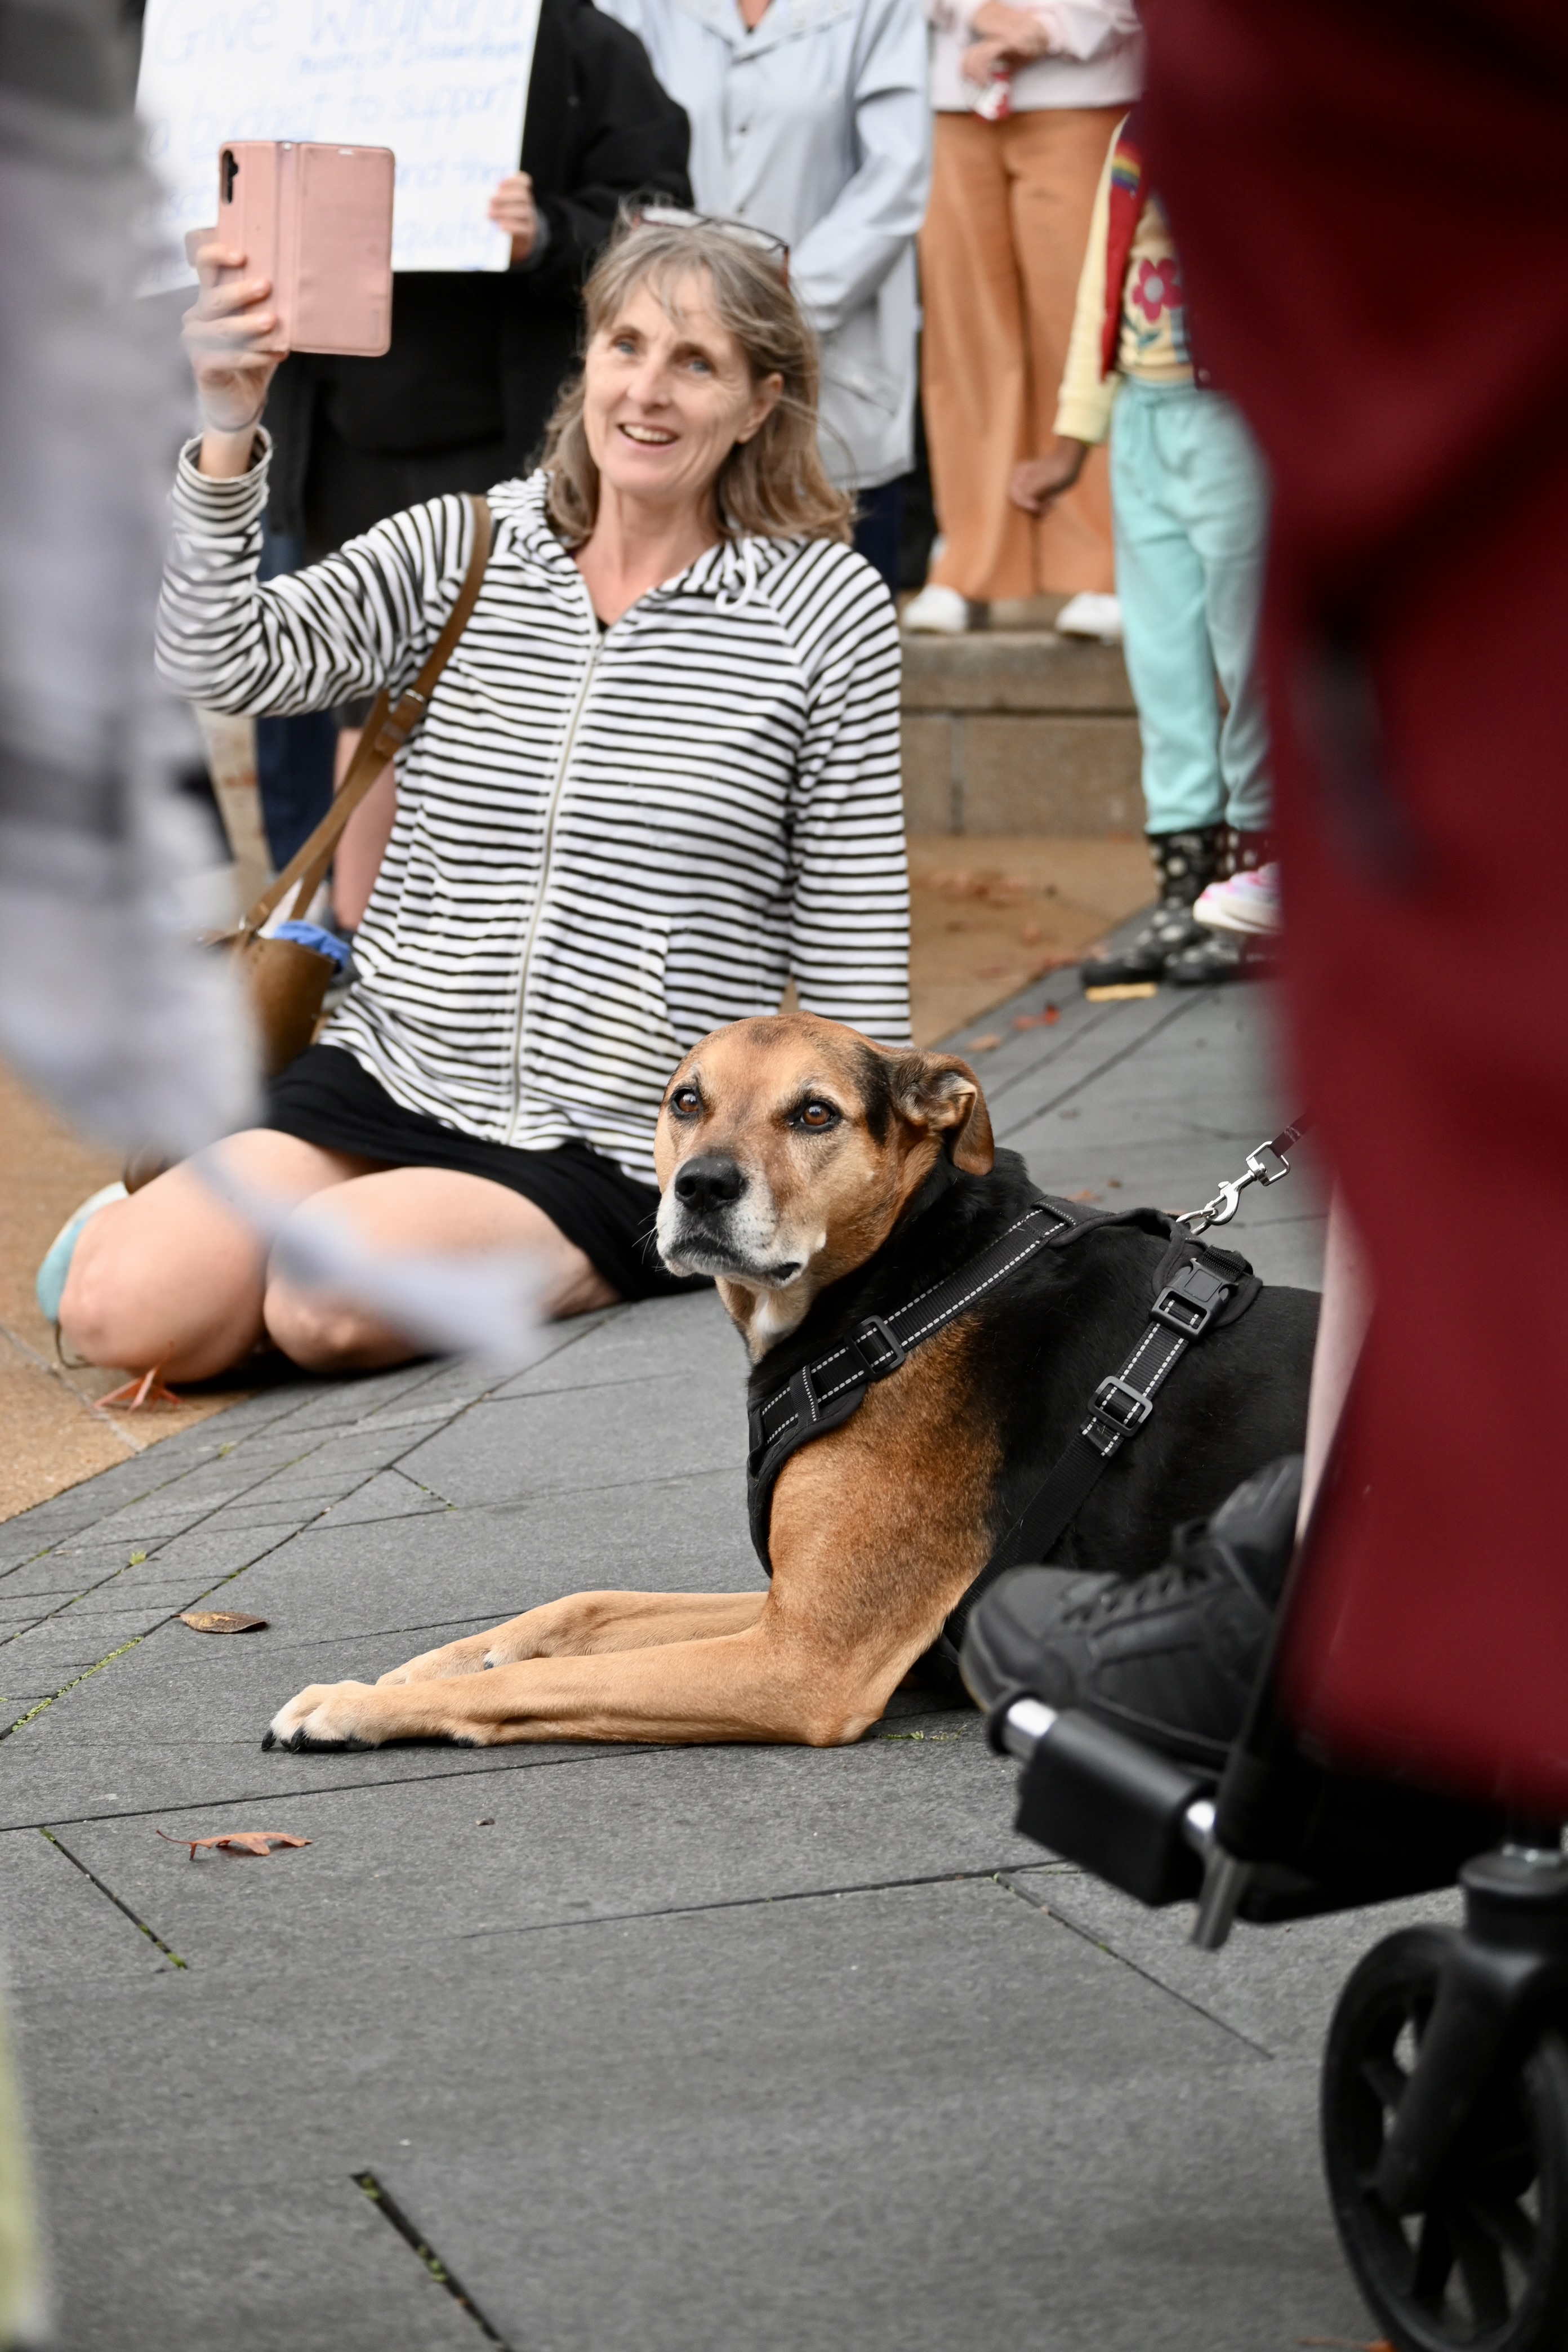 A dog is lying on the ground among a crowd. A woman is in the background recording on her phone.